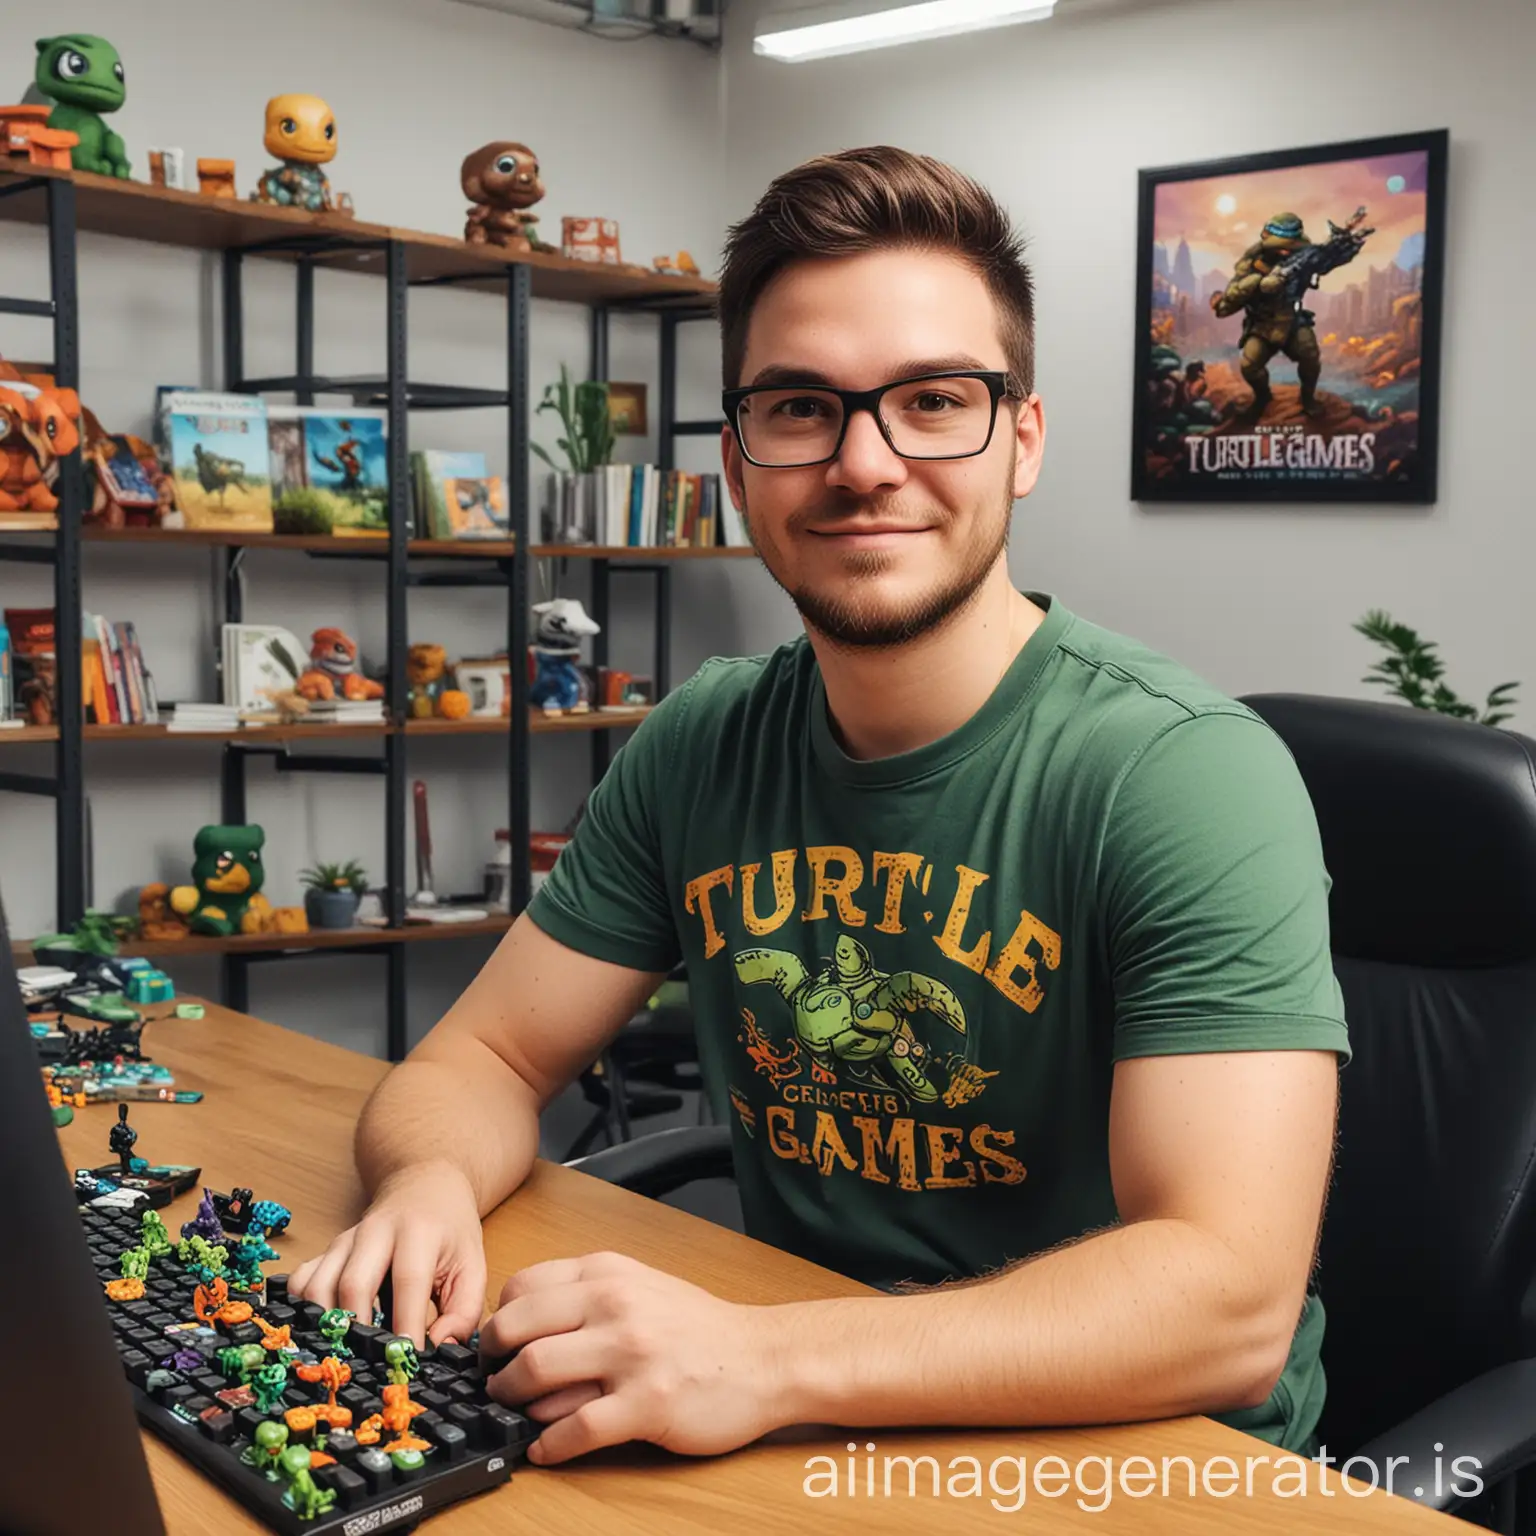 game designer in creative and colorful gaming company office named Turtle Games